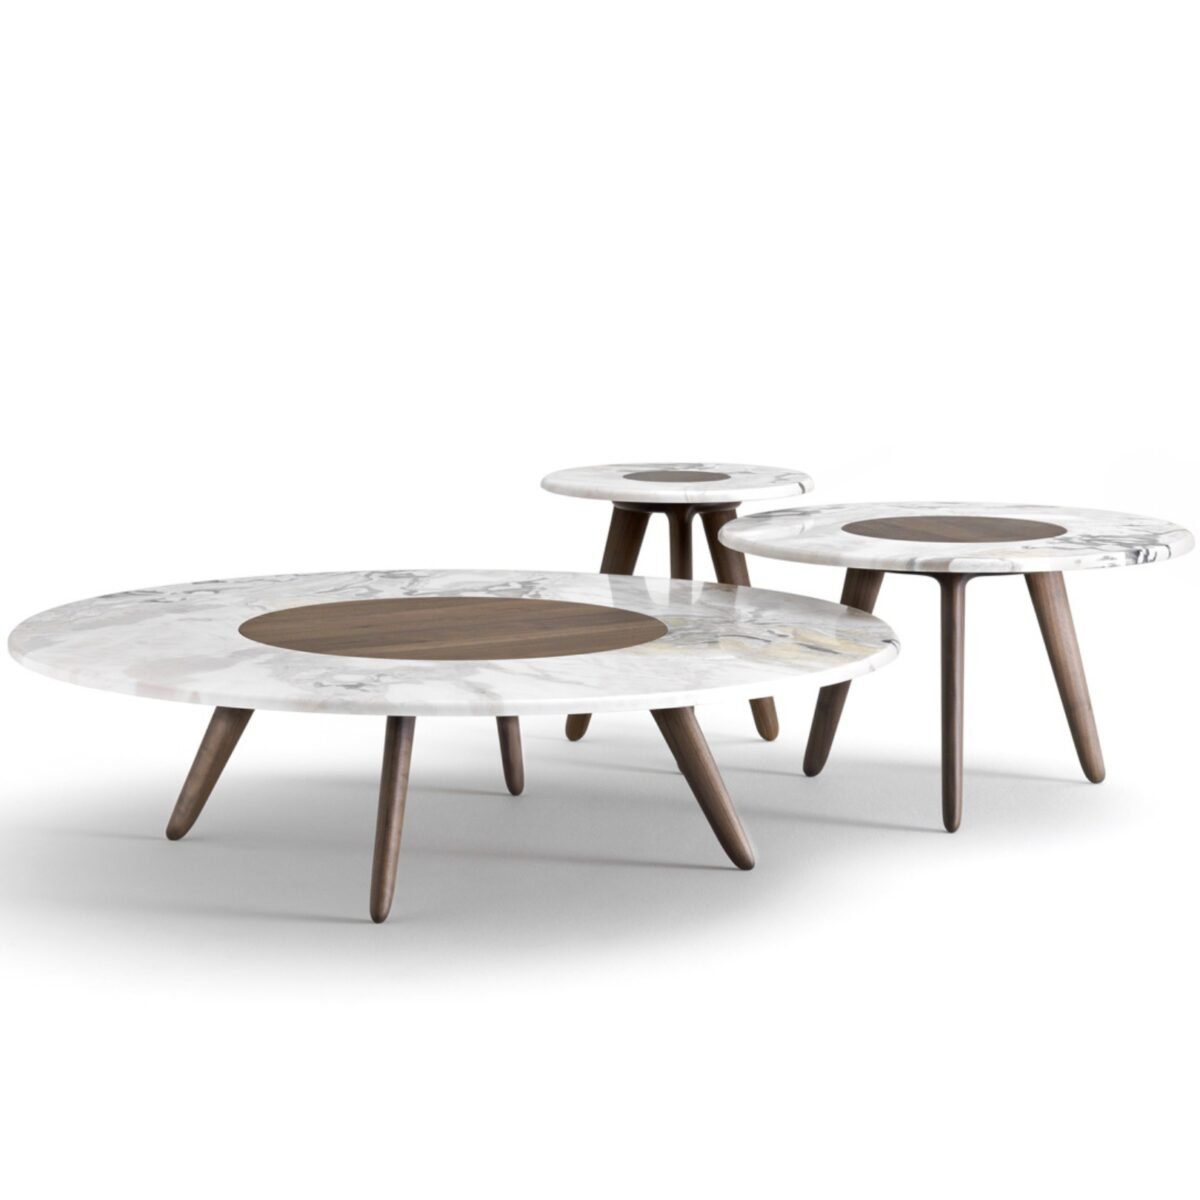 Ceppi the Italian Touch Lotus small table